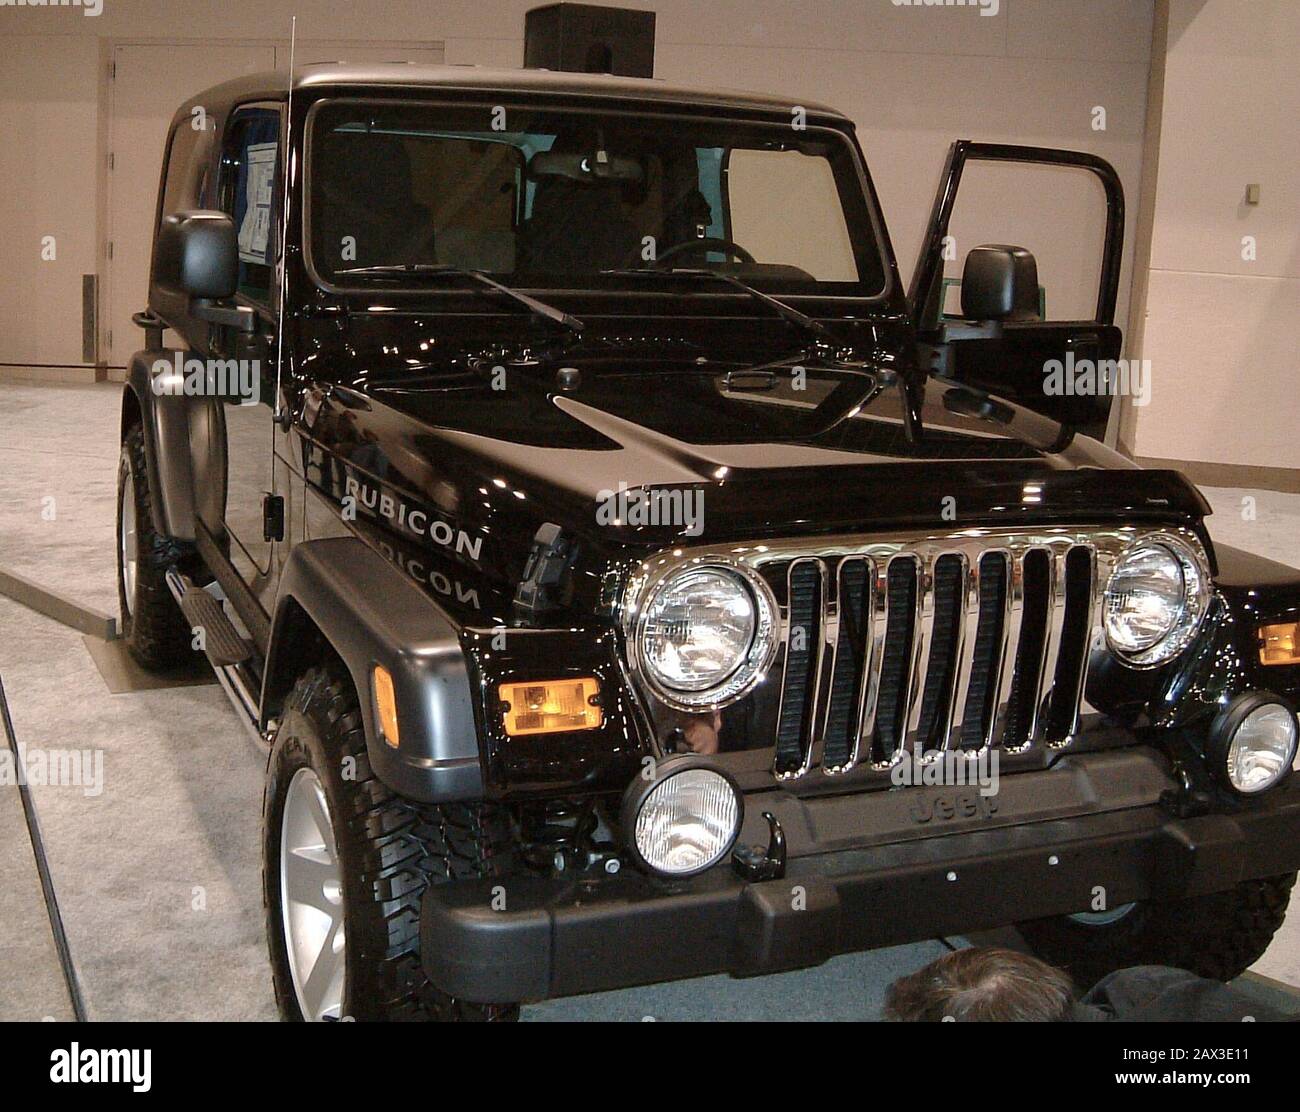 jeep wrangler rubicon; 13 March 2007 (original upload date); Transferred  from  to Commons by Spyder Monkey using CommonsHelper.; Pluik  at English Wikipedia Stock Photo - Alamy